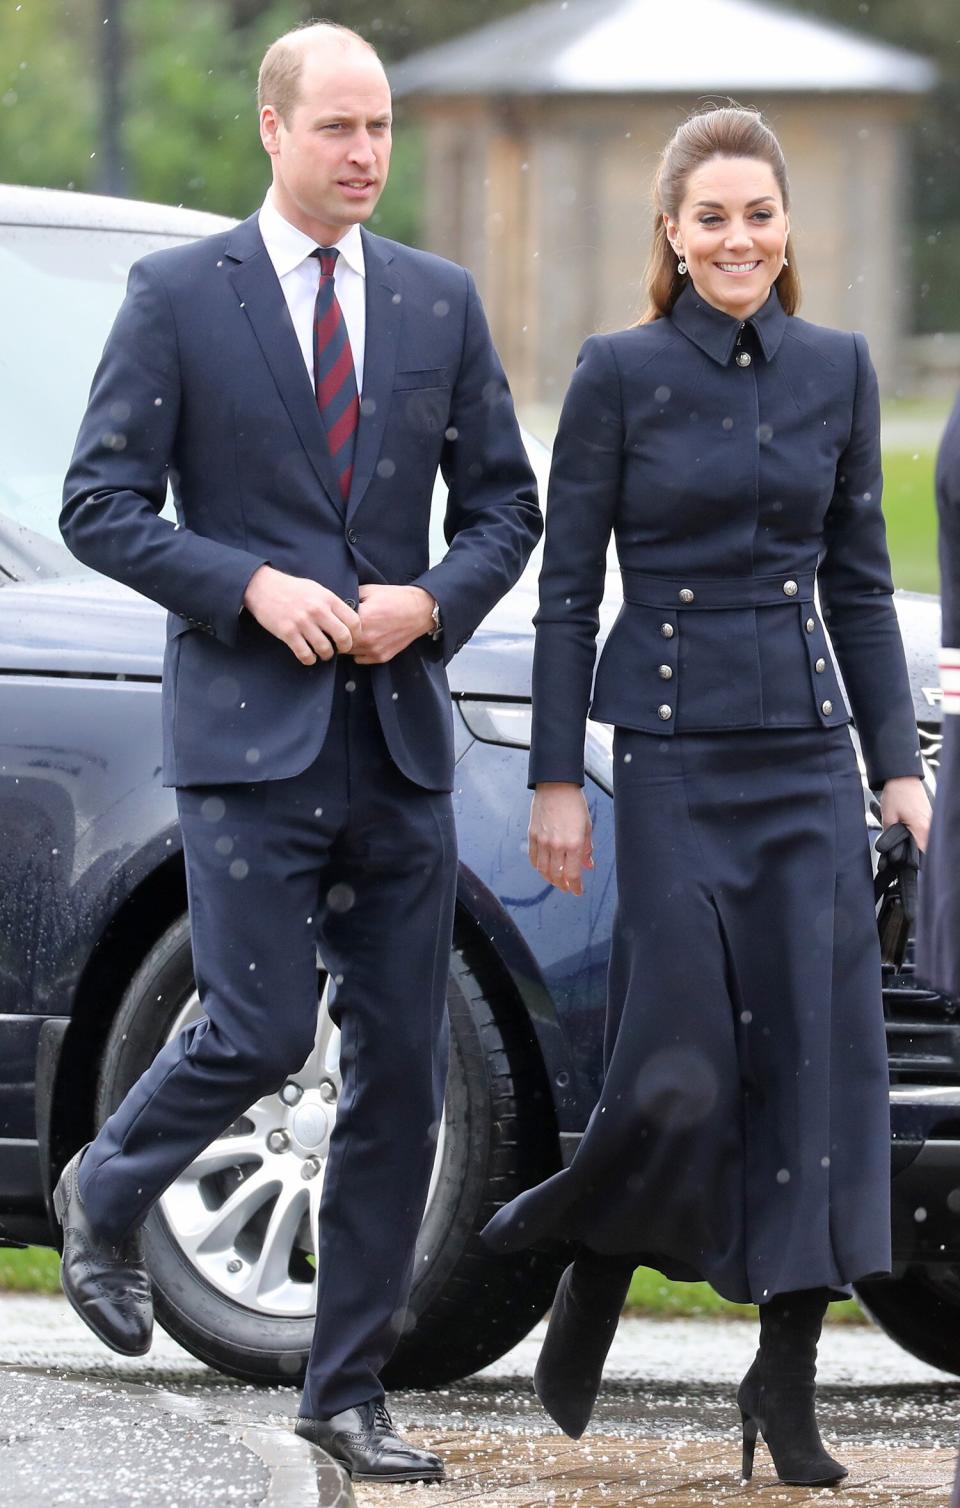 Prince William and Princess Kate recently <a href="https://people.com/royals/future-kings-unite-prince-william-and-prince-charles-have-rare-outing-with-wives-kate-and-camilla/" rel="nofollow noopener" target="_blank" data-ylk="slk:toured the Defence Medical Rehabilitation Centre in Leicestershire;elm:context_link;itc:0;sec:content-canvas" class="link ">toured the Defence Medical Rehabilitation Centre in Leicestershire</a> with Prince Charles and Camilla. For the outing, Kate opted for a navy military-style skirt suit by Alexander McQueen, black heeled boots, and a matching black clutch. <strong>Get the Look!</strong> Luvamia Open Front Long Sleeve Button Front Blazer, $29.99–$36.99; <a href="https://www.amazon.com/luvamia-Womens-Sleeves-Blazer-Buttons/dp/B07JJG1XPY/ref=as_li_ss_tl?ie=UTF8&linkCode=ll1&tag=poamzfkatemiddletonwinterstylekphillips0220-20&linkId=dbdaac39534416916bc1c396bd8aa486&language=en_US" rel="nofollow noopener" target="_blank" data-ylk="slk:amazon.com;elm:context_link;itc:0;sec:content-canvas" class="link ">amazon.com</a> Tommy Hilfiger Military Band Jacket, $65.70 with code LOVE (orig. $109.50); <a href="https://click.linksynergy.com/deeplink?id=93xLBvPhAeE&mid=3184&murl=https%3A%2F%2Fwww.macys.com%2Fshop%2Fproduct%2Ftommy-hilfiger-military-band-jacket%3FID%3D6470223&u1=PEO%2CShopping%3AEverythingYouNeedtoCopyKateMiddleton%E2%80%99sChicWinterStyle%2Ckamiphillips2%2CUnc%2CGal%2C7360903%2C202002%2CI" rel="nofollow noopener" target="_blank" data-ylk="slk:macys.com;elm:context_link;itc:0;sec:content-canvas" class="link ">macys.com</a> Kate Kasin Victorian Steampunk Ringmaster Jacket Military Blazer, $40.99 (orig. $59.99); <a href="https://www.amazon.com/Womens-Victorian-Steampunk-Military-X-Large/dp/B0752TY1NQ/ref=as_li_ss_tl?ie=UTF8&linkCode=ll1&tag=poamzfkatemiddletonwinterstylekphillips0220-20&linkId=bc2febb809d321d3bf4148a3ccd22d5f&language=en_US" rel="nofollow noopener" target="_blank" data-ylk="slk:amazon.com;elm:context_link;itc:0;sec:content-canvas" class="link ">amazon.com</a> Lioness Palermo Blazer, $88; <a href="https://click.linksynergy.com/deeplink?id=93xLBvPhAeE&mid=42352&murl=https%3A%2F%2Fwww.shopbop.com%2Fpalermo-blazer-lioness%2Fvp%2Fv%3D1%2F1578043974.htm&u1=PEO%2CShopping%3AEverythingYouNeedtoCopyKateMiddleton%E2%80%99sChicWinterStyle%2Ckamiphillips2%2CUnc%2CGal%2C7360903%2C202002%2CI" rel="nofollow noopener" target="_blank" data-ylk="slk:shopbop.com;elm:context_link;itc:0;sec:content-canvas" class="link ">shopbop.com</a> Curlbiuty Casual Stand Collar Buttons Military Blazer, $19.99–$31.99; <a href="https://www.amazon.com/Blazer-Casual-Buttons-Military-Jacket/dp/B07VNXDNK3/ref=as_li_ss_tl?ie=UTF8&linkCode=ll1&tag=poamzfkatemiddletonwinterstylekphillips0220-20&linkId=8807fe8fd52a1a12d45fe22e42ace08d&language=en_US" rel="nofollow noopener" target="_blank" data-ylk="slk:amazon.com;elm:context_link;itc:0;sec:content-canvas" class="link ">amazon.com</a>